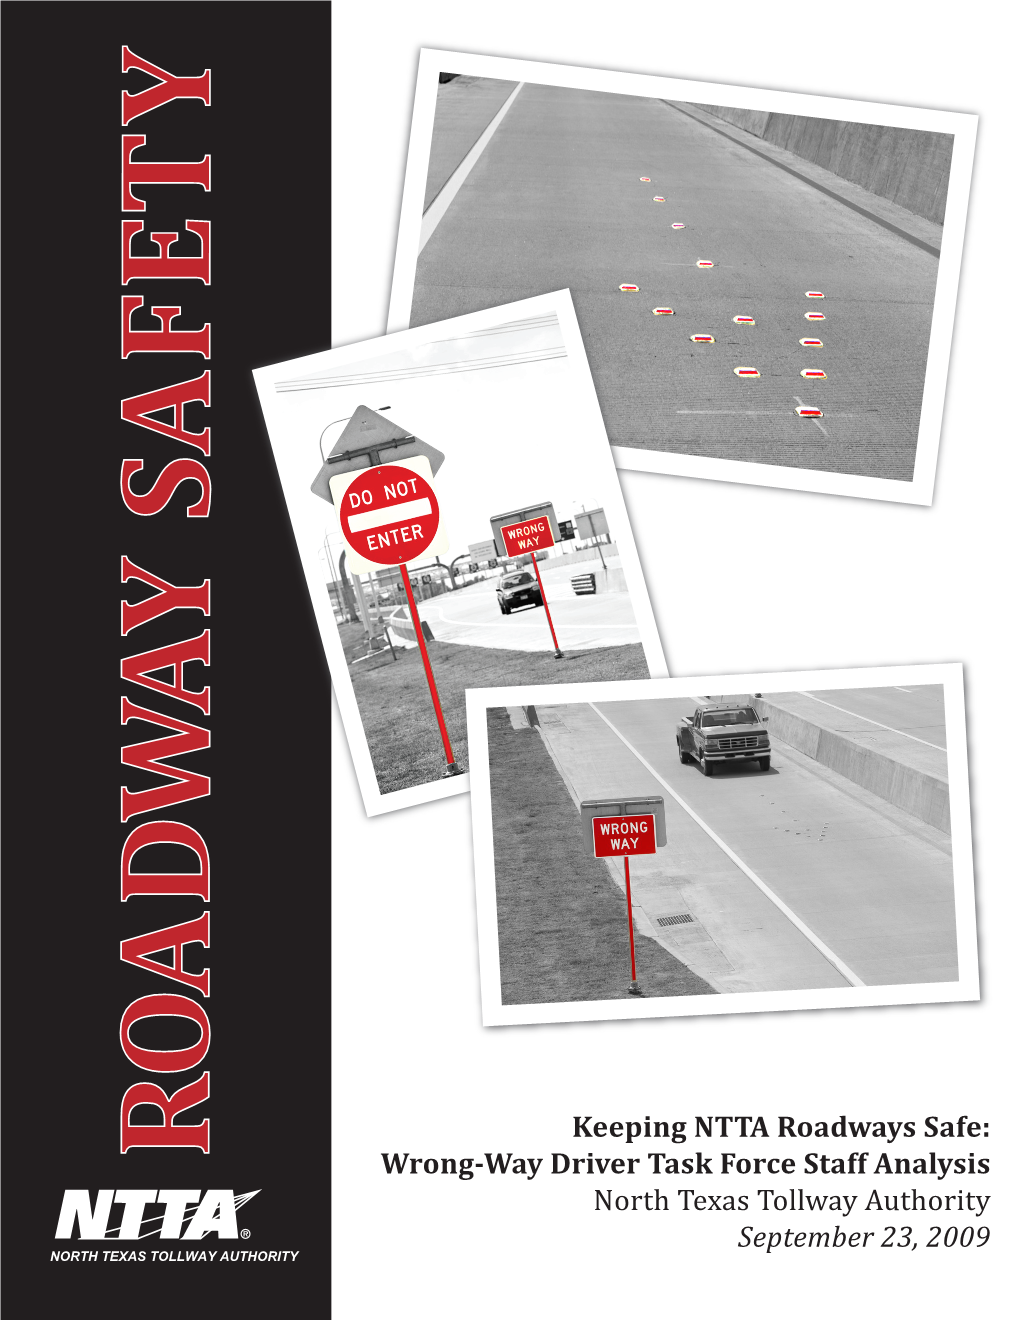 Wrong-Way Driver Task Force Staff Analysis North Texas Tollway